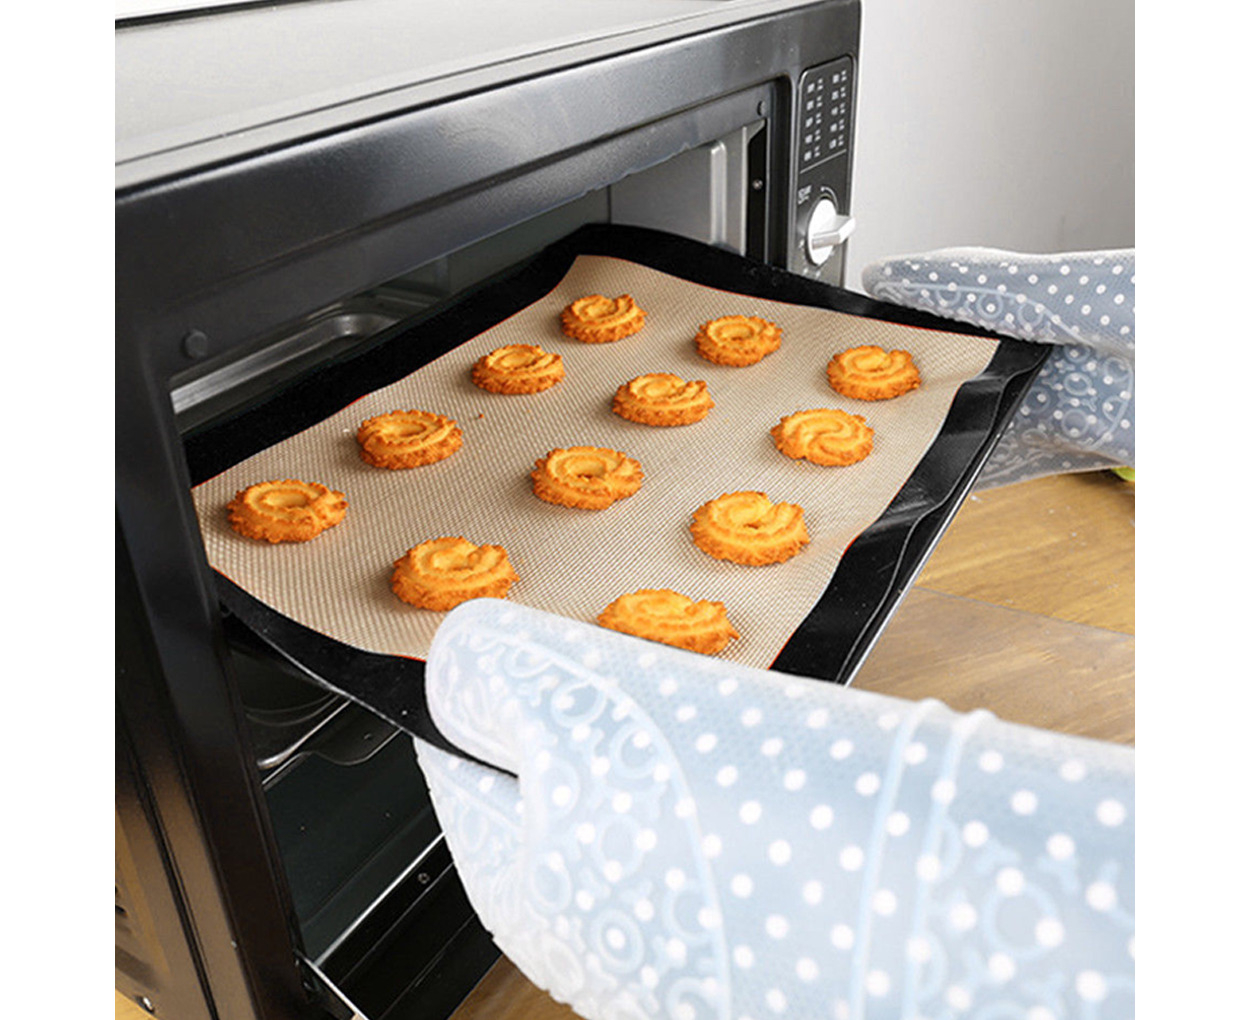 Non-stick Cooking Mat Liner for Macaroons Cake Bread Making Microwave Toaster Oven Tray Pan,42x29.5cm 2 Silicone Macaron Baking Mat Cookie Sheet Set 